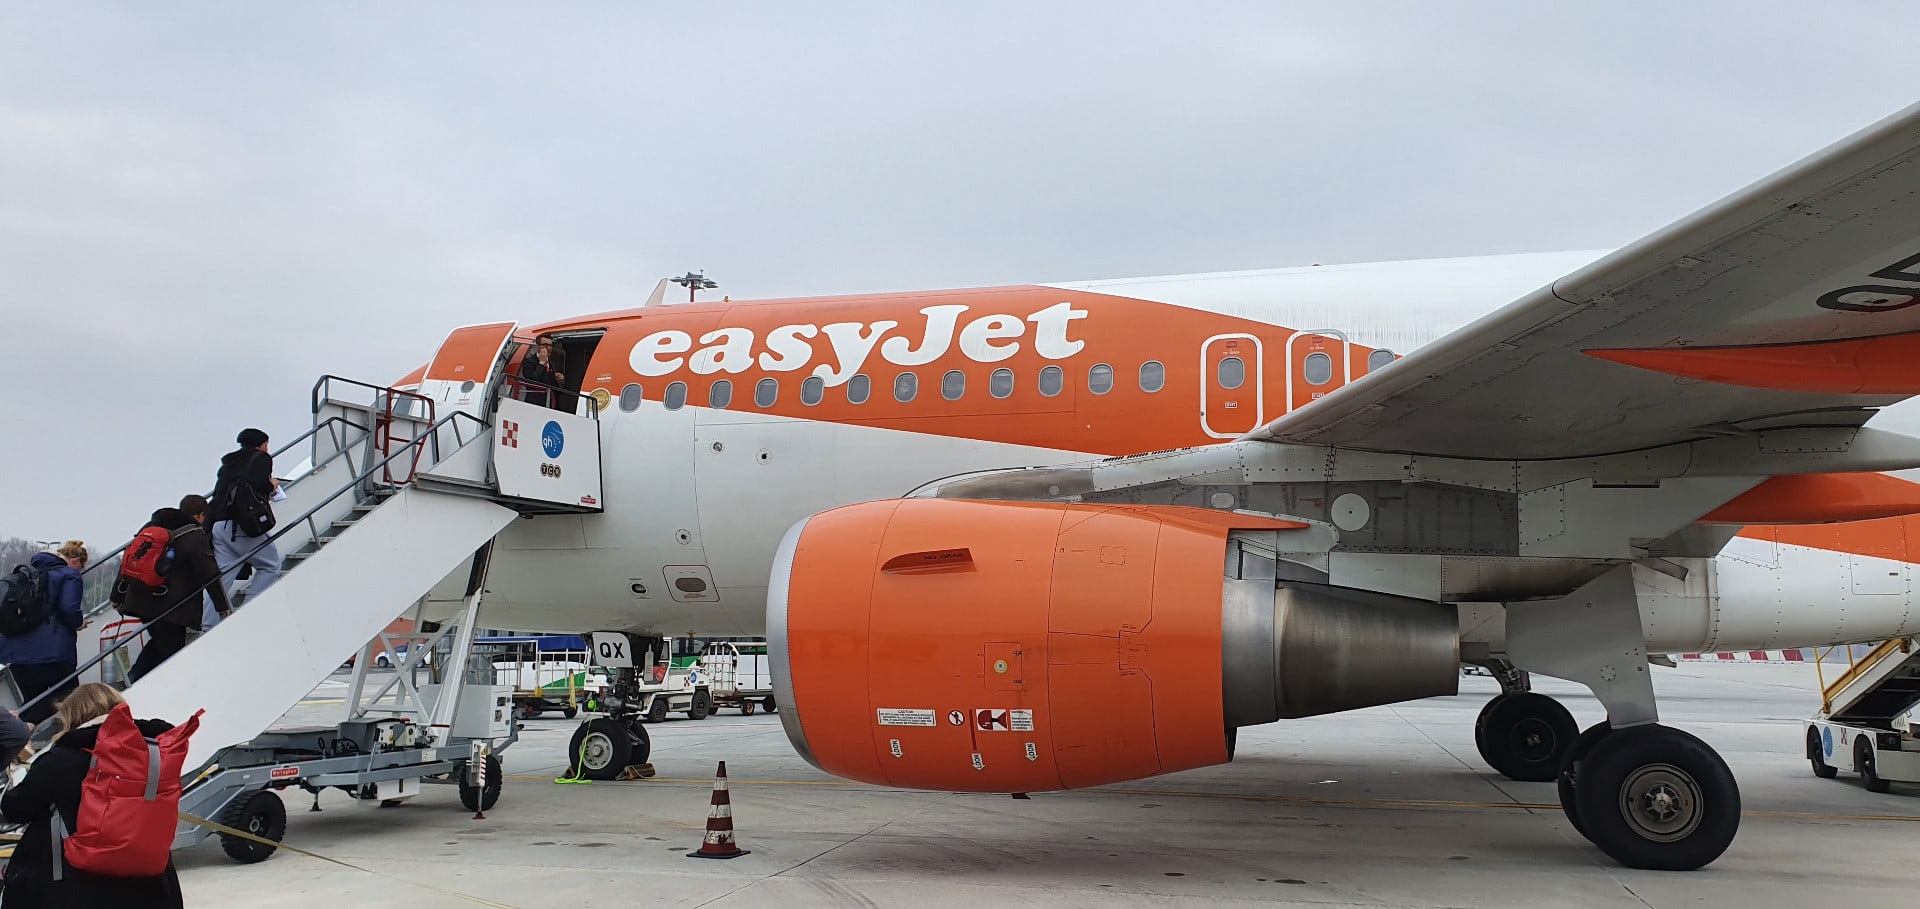 easyJet: Nonstop Roundtrips to/from 